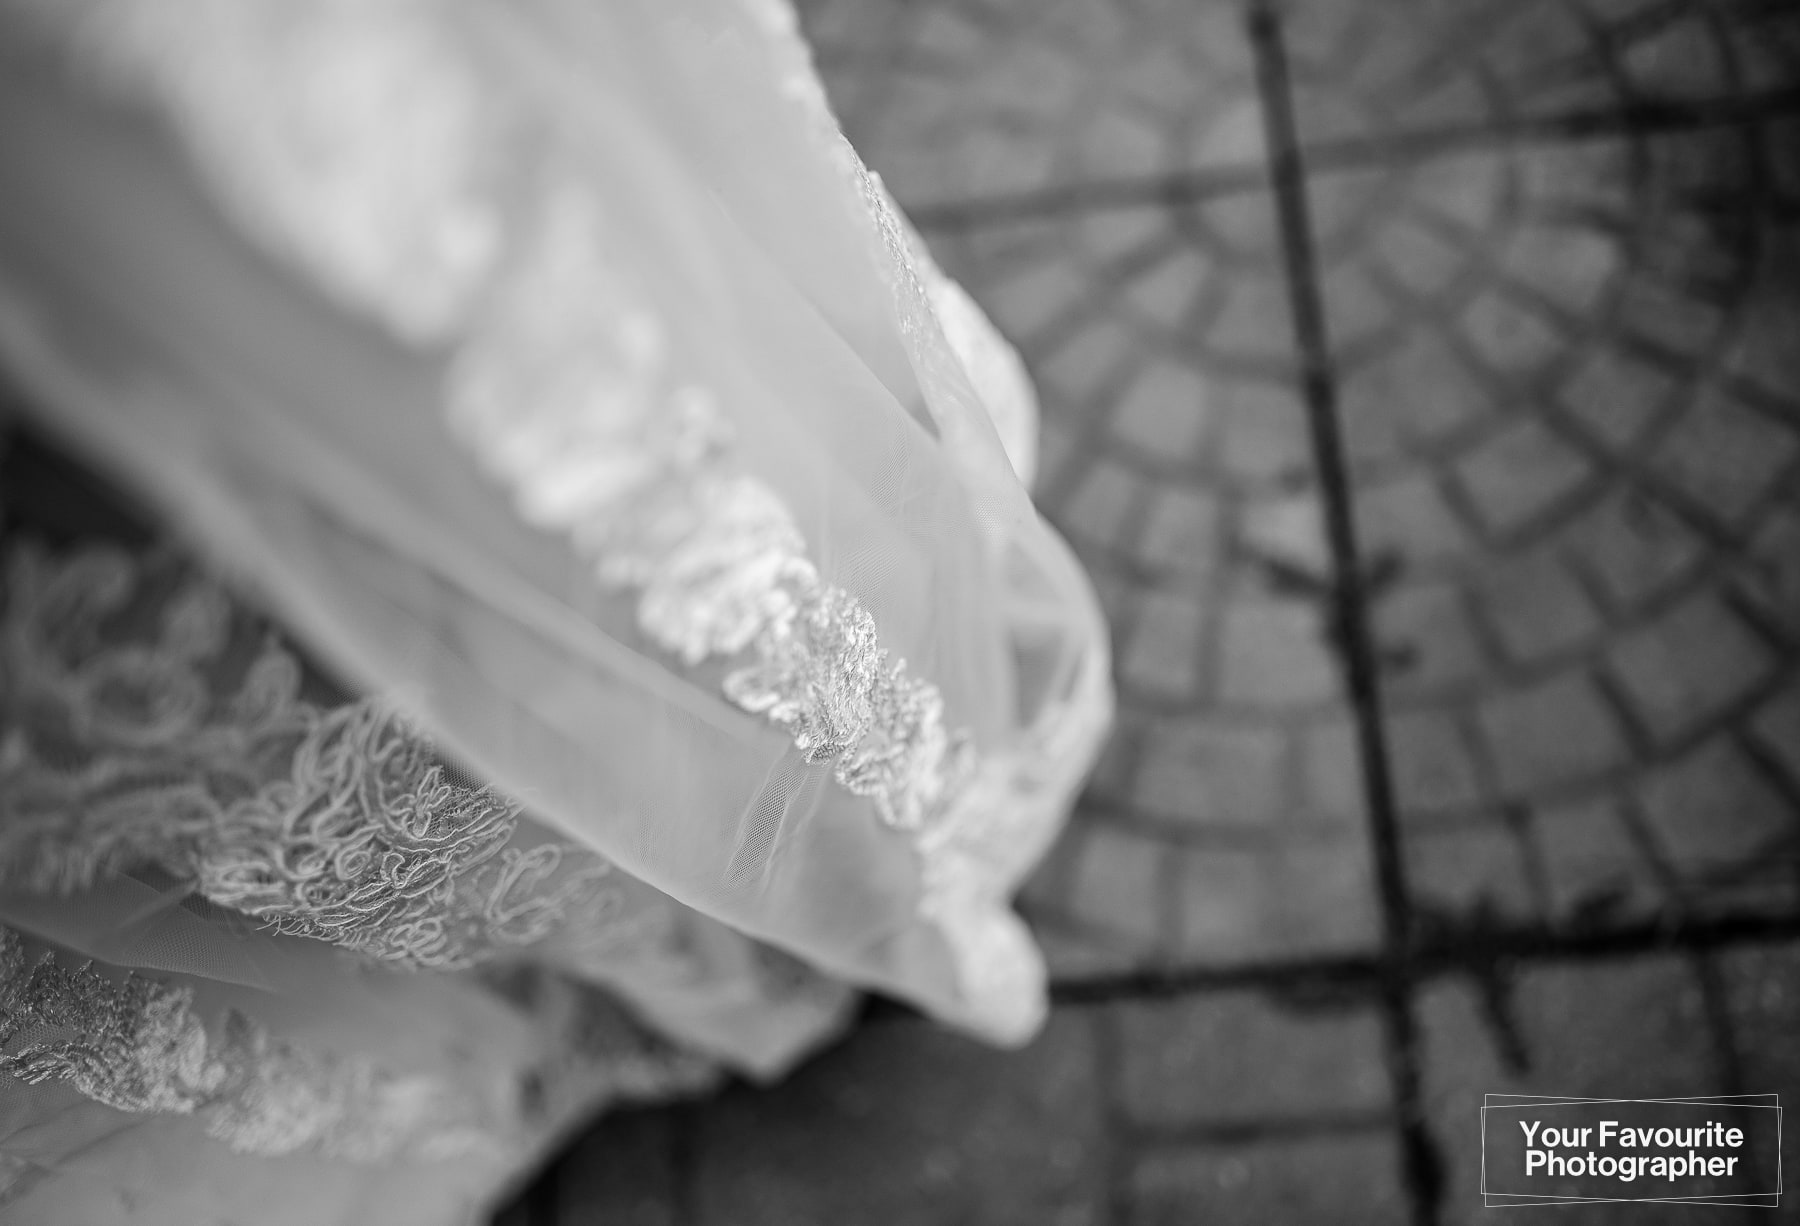 Lace detail of wedding dress in black and white